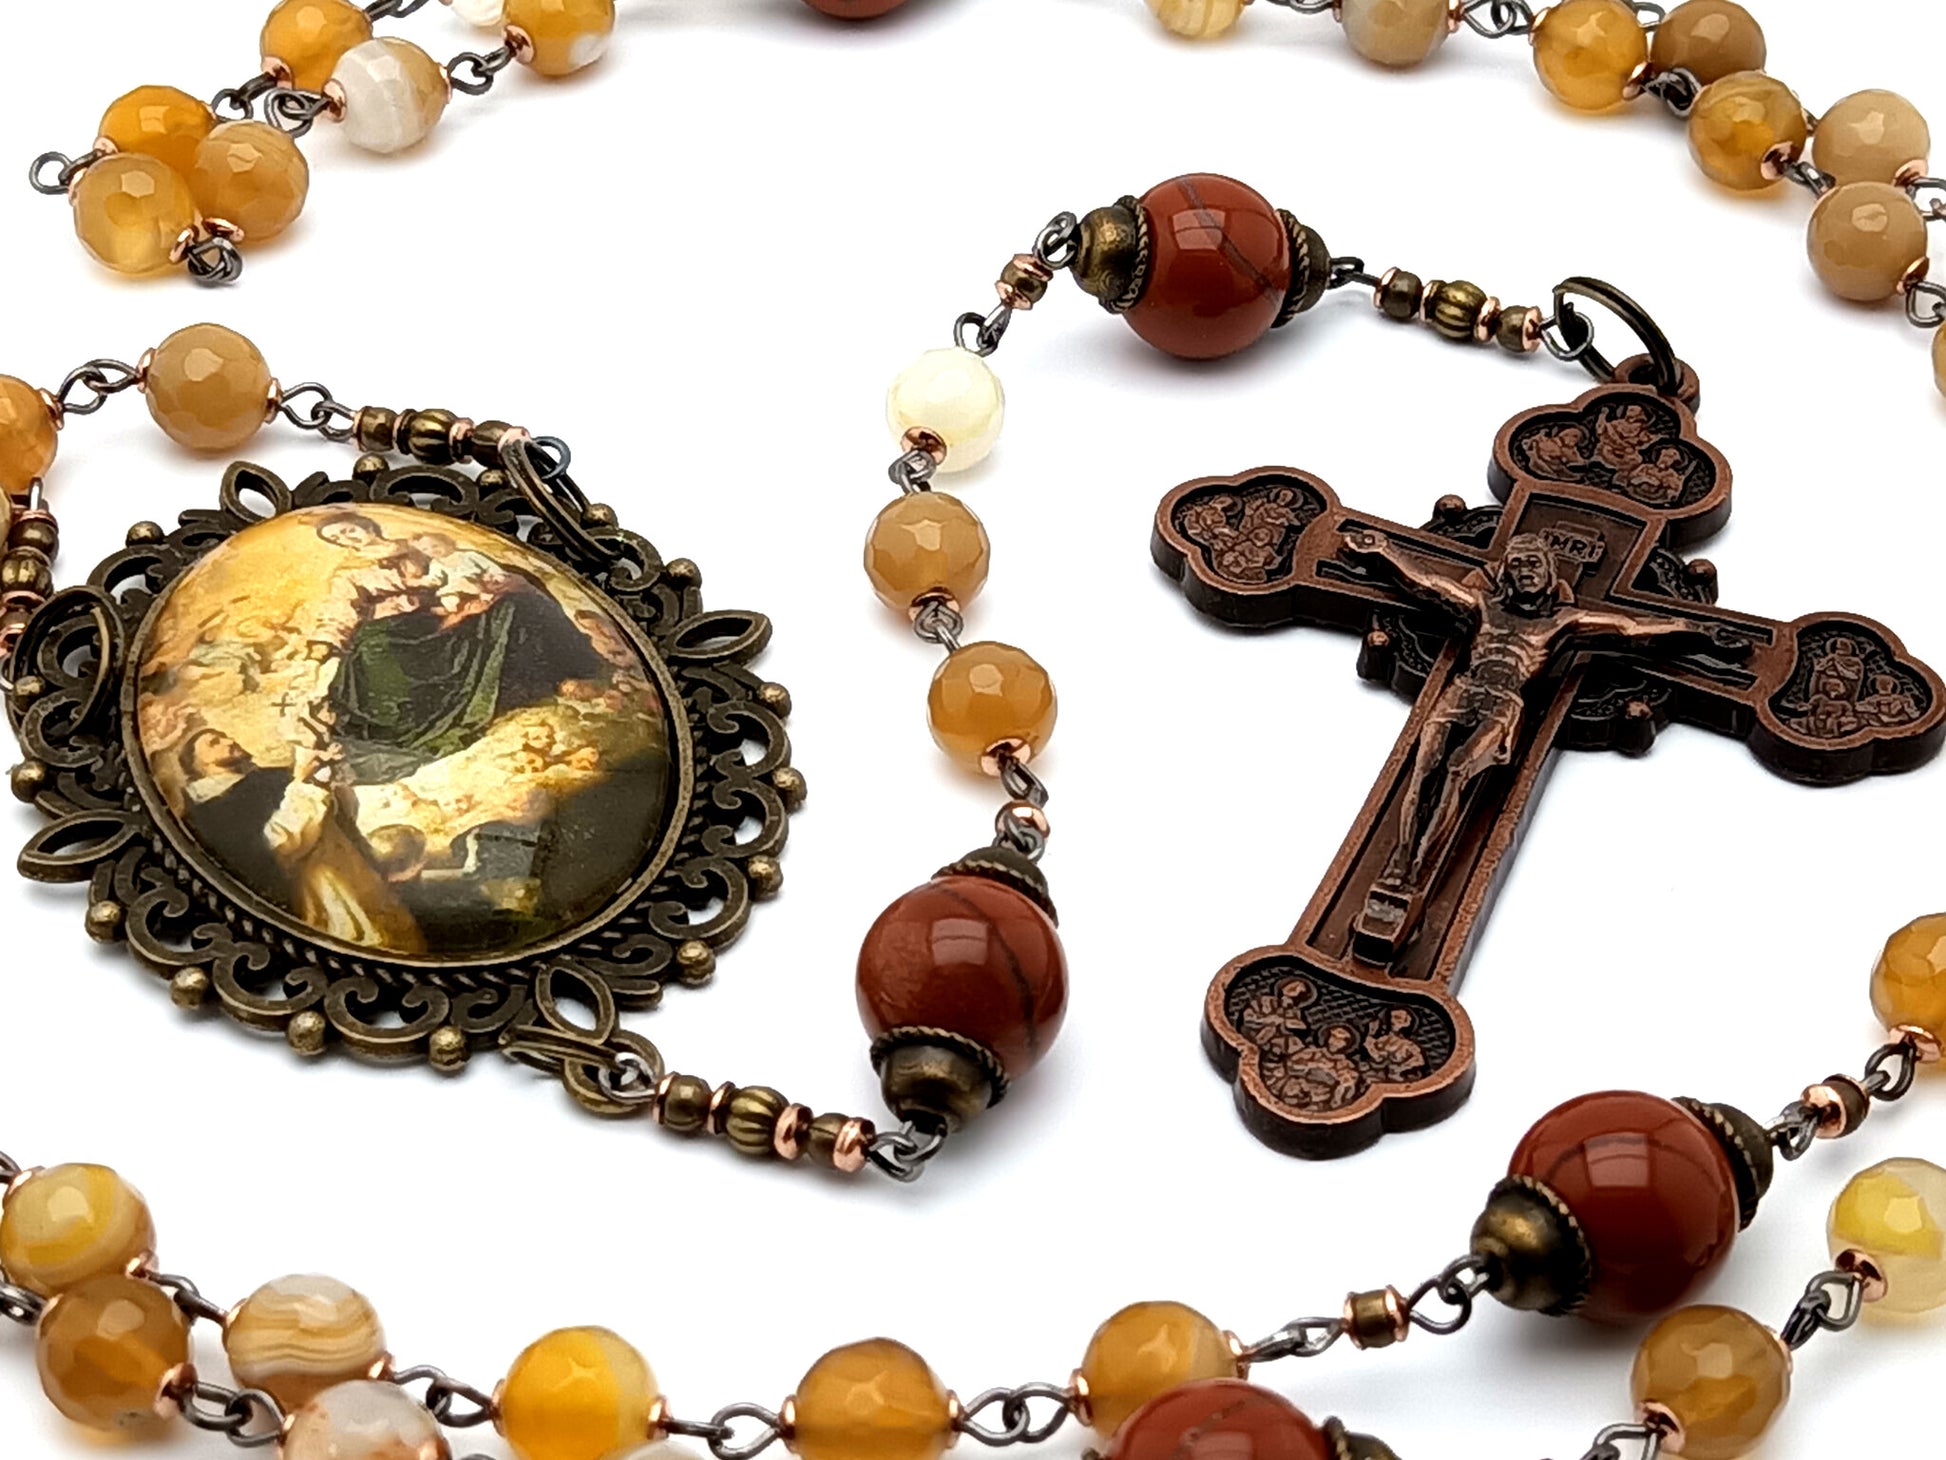 Our Lady of The Rosary and Saint Simon Stock unique rosary beads with agate gemstone beads and Twelve Apostles copper crucifix.